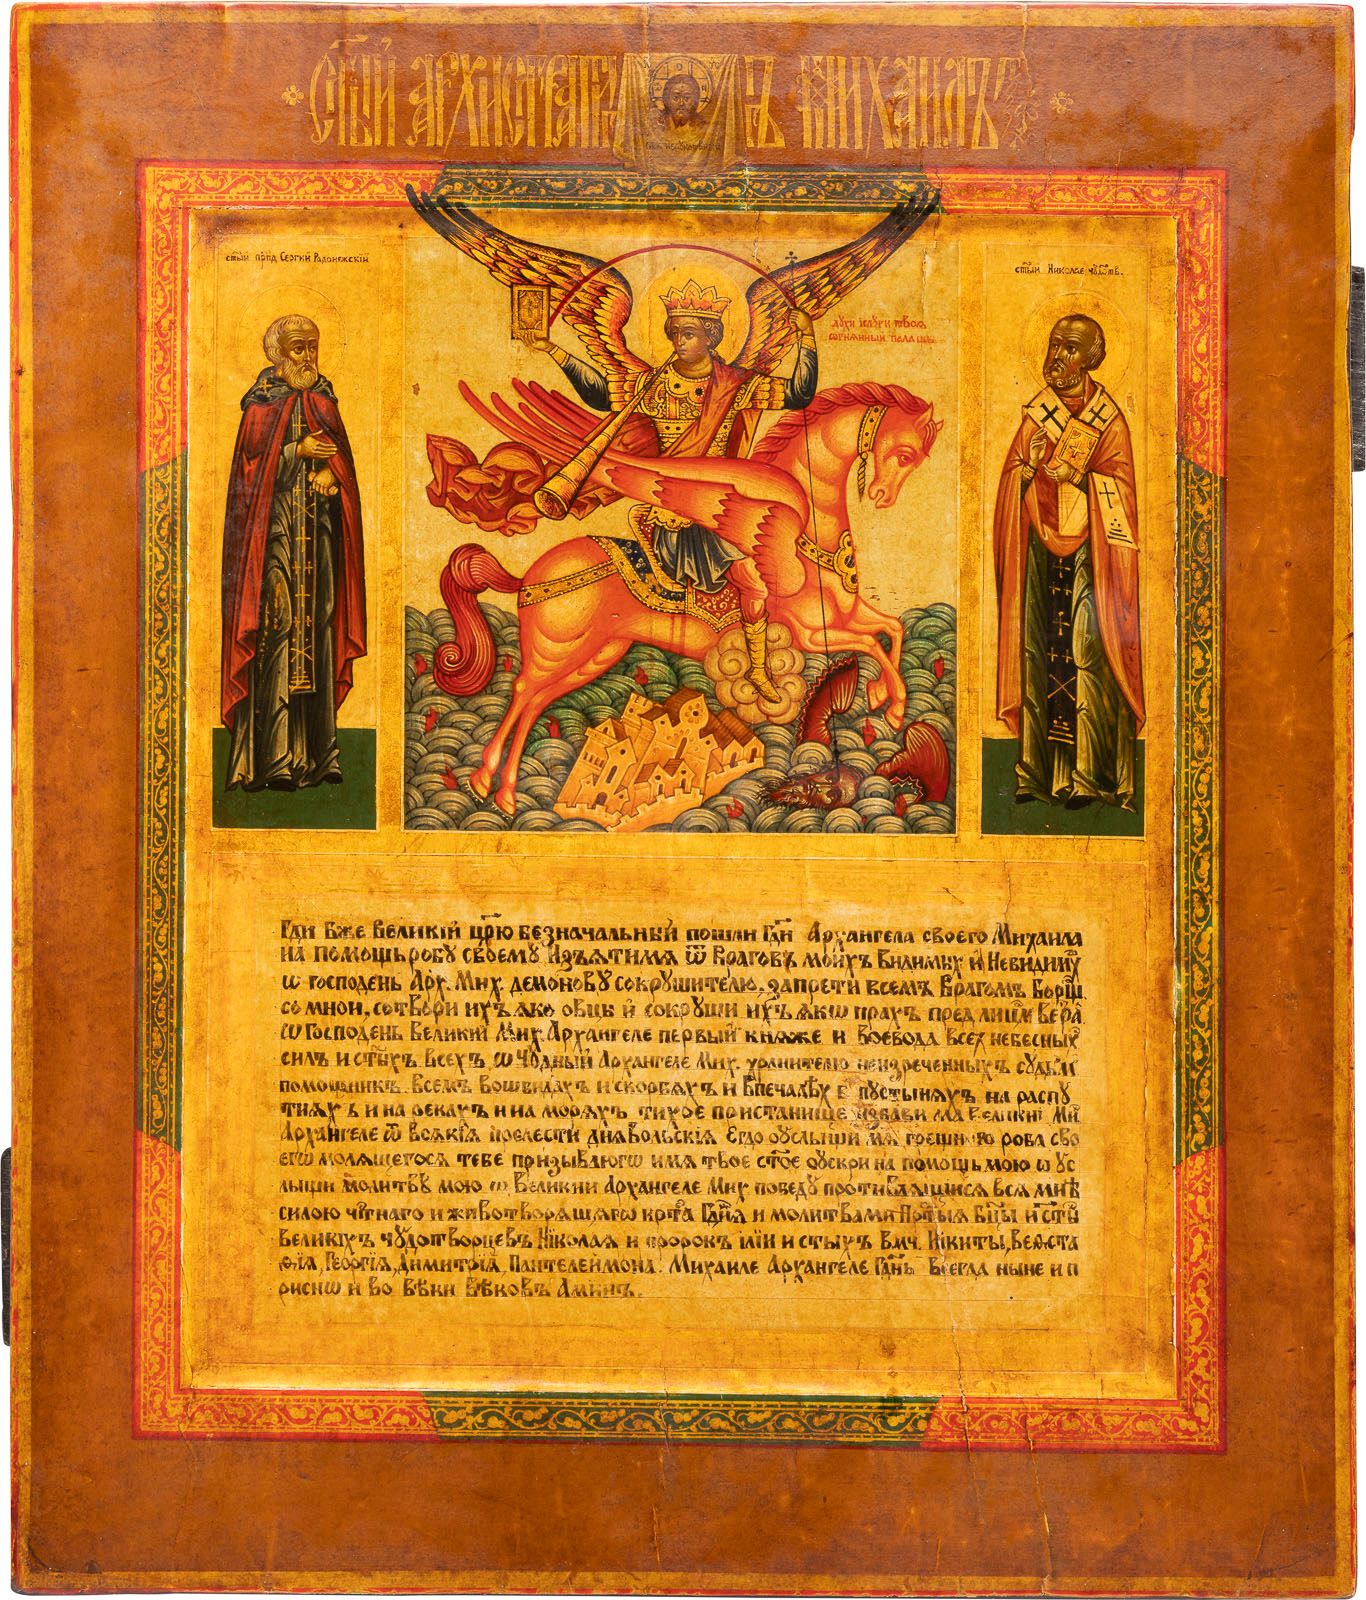 AN ICON SHOWING THE ARCHANGEL MICHAEL FLANKED BY ST. SERGEY ICONO CON EL SANTO Á&hellip;